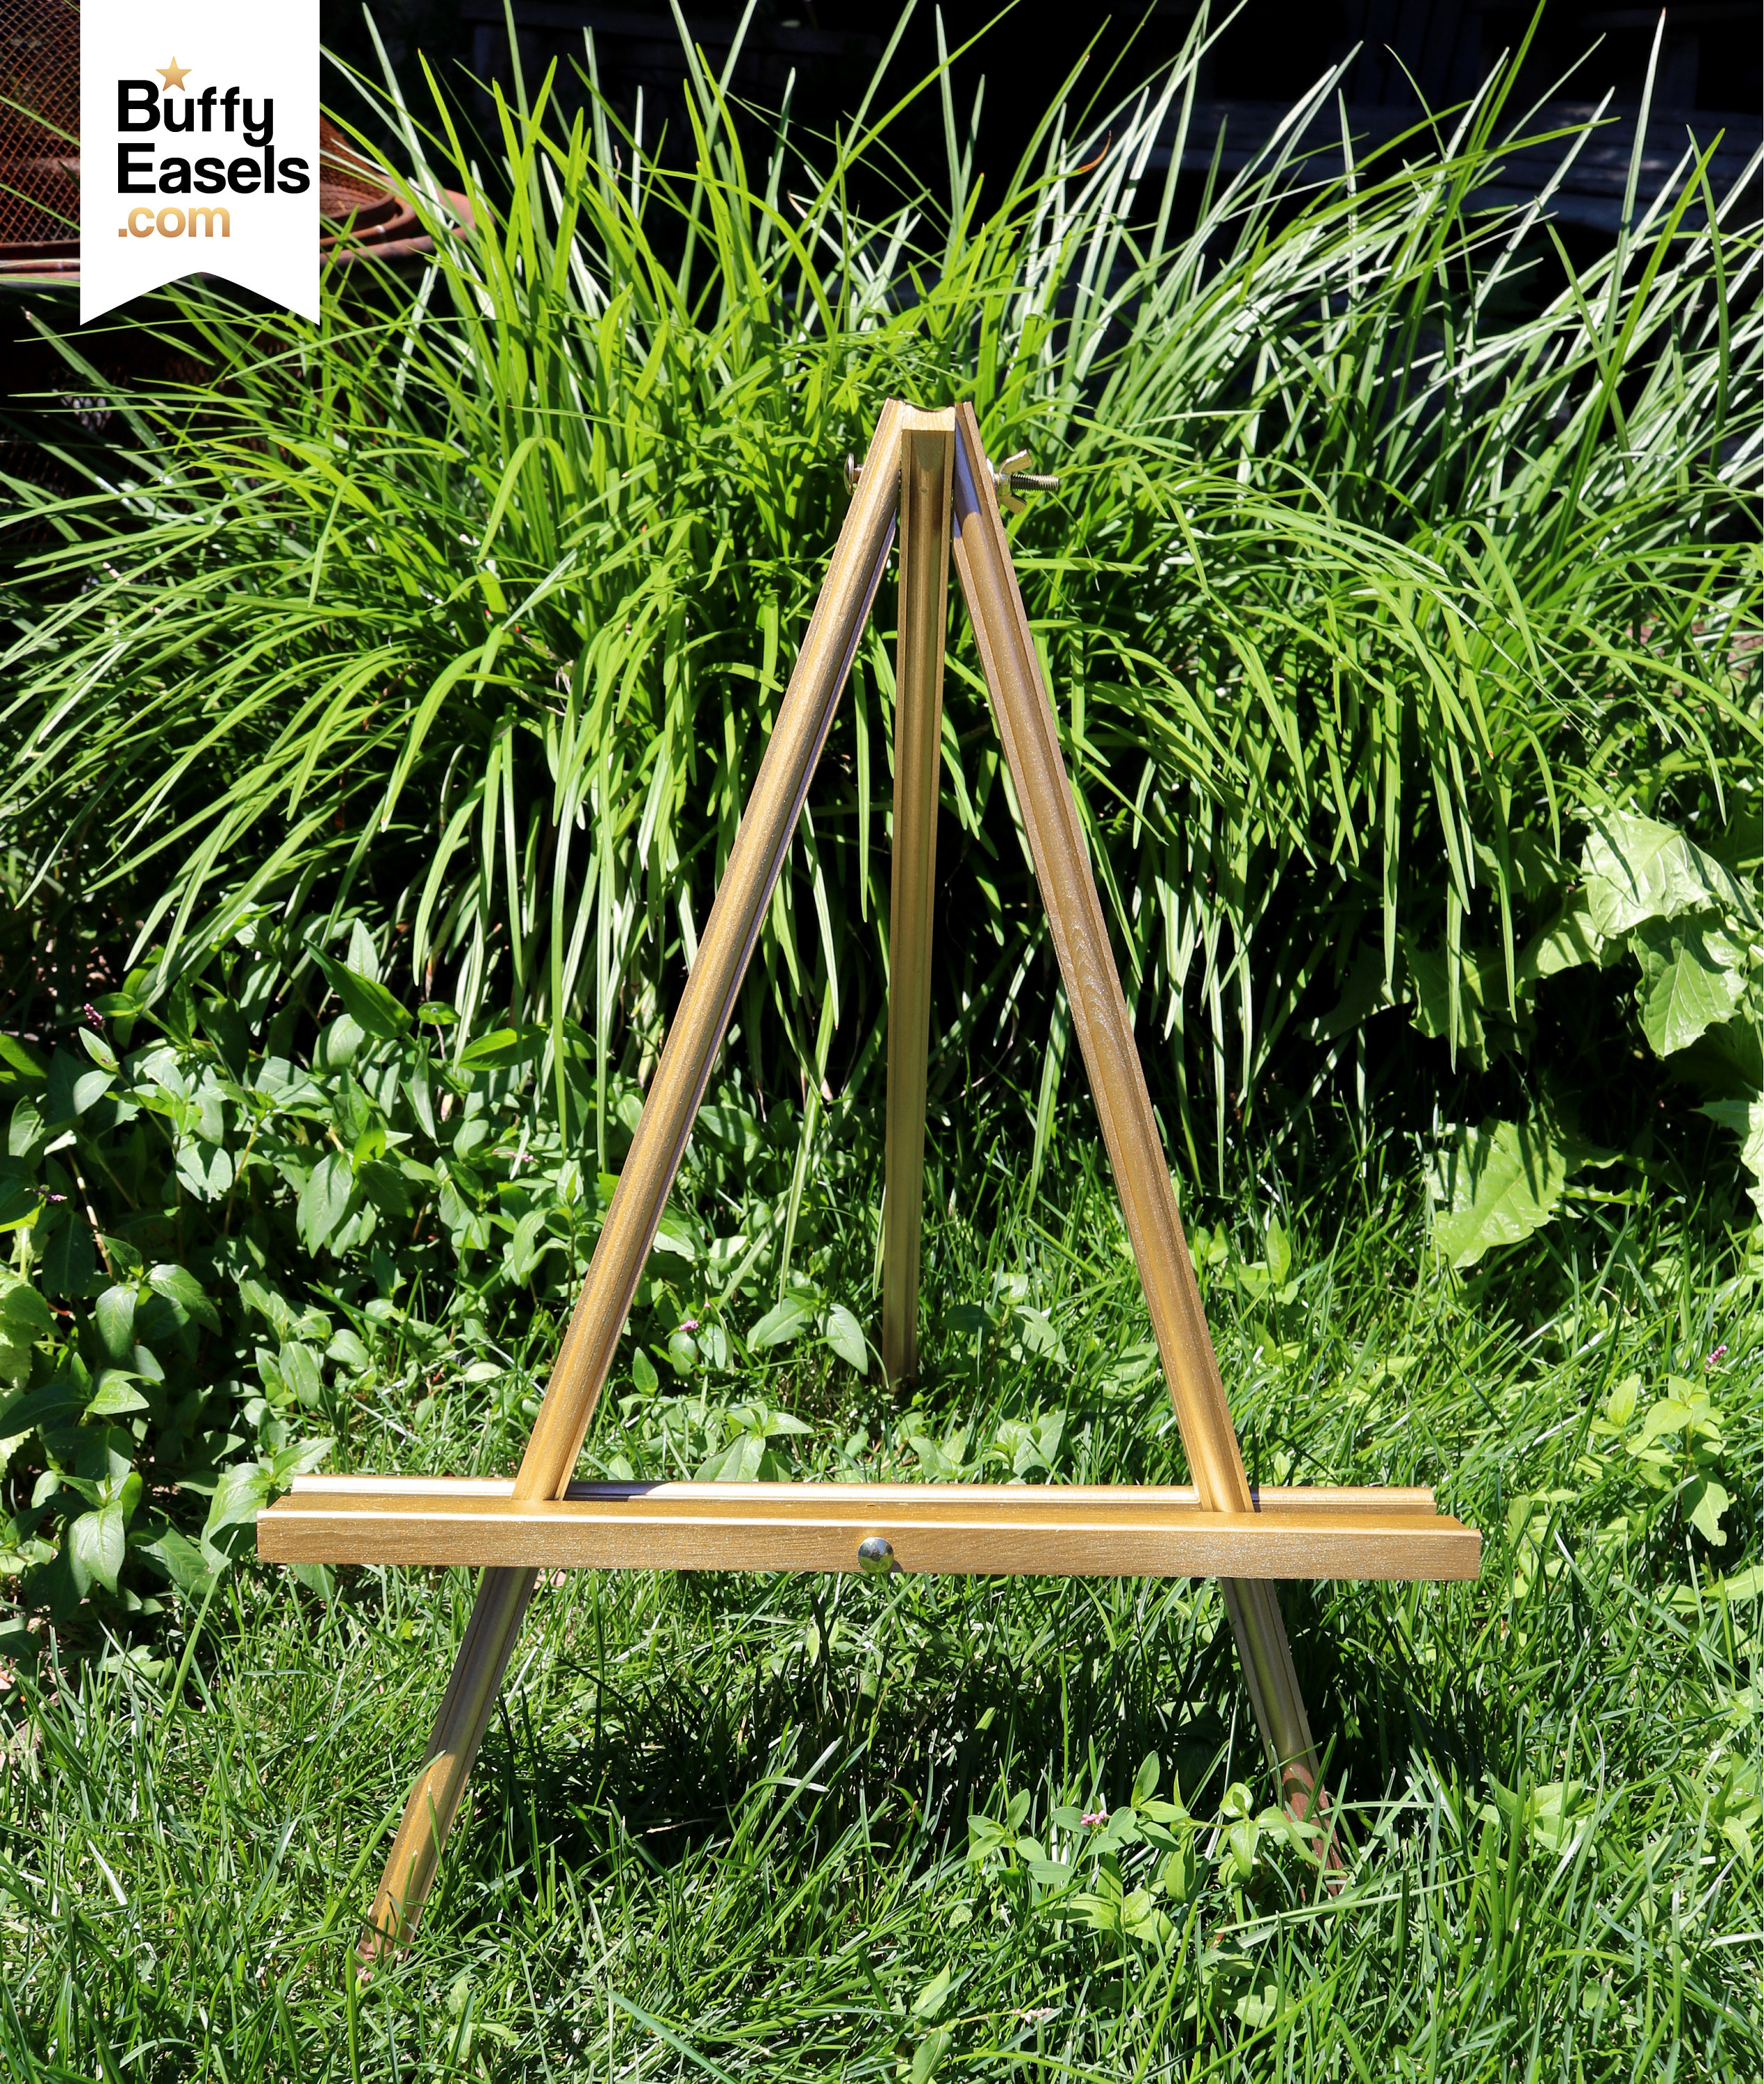 Wooden Easel Stand, Wooden Stand, Wooden Picture Stand, Easel